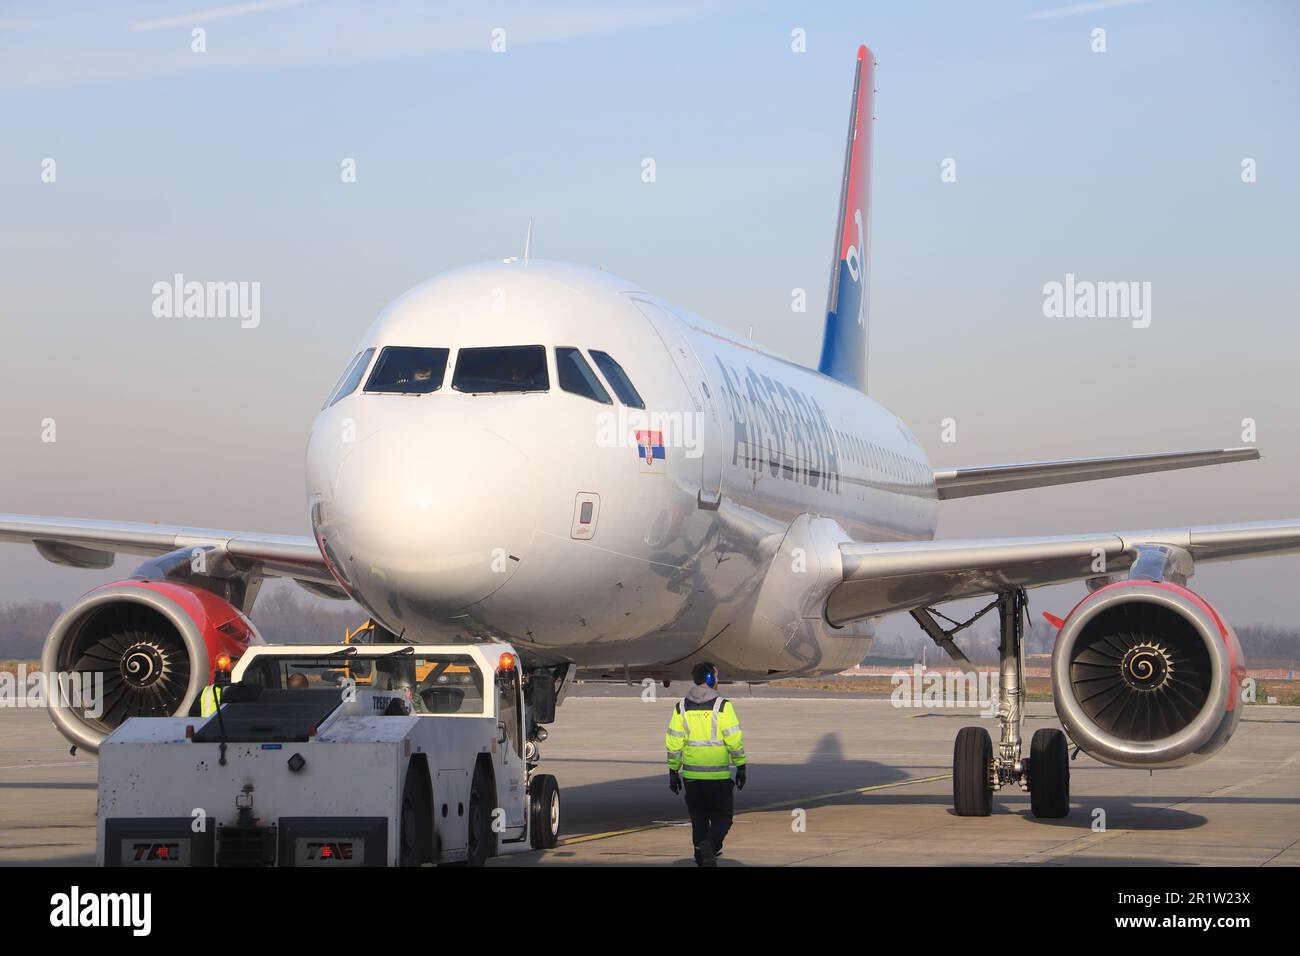 A commercial airliner serviced at a major airport in the late afternoon Stock Photo